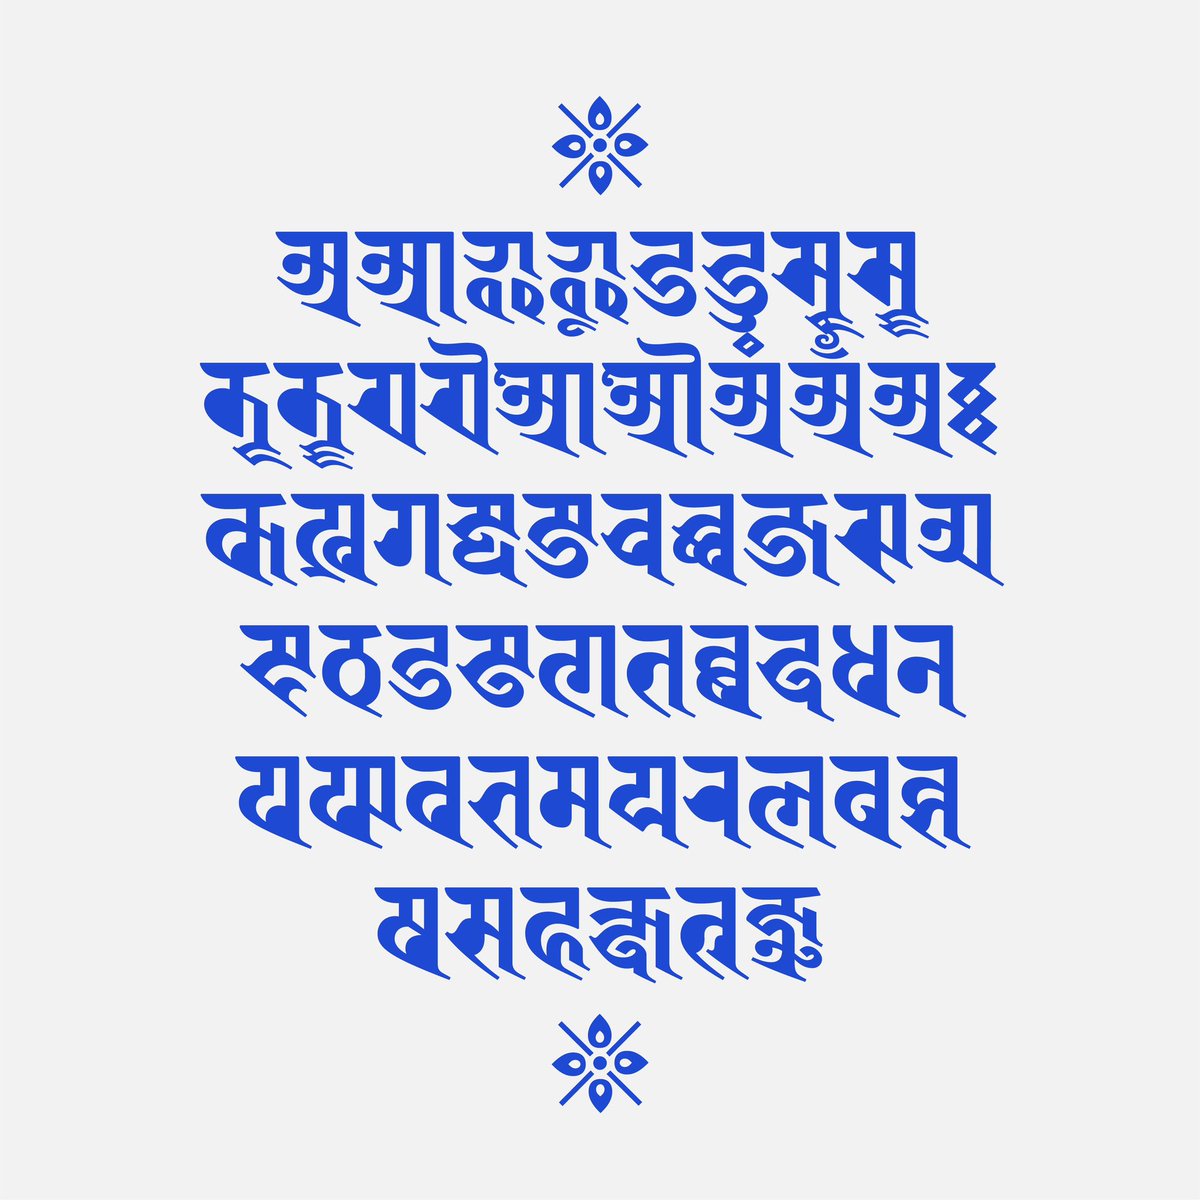 A new typeface from @EkTypeFoundry and Callijatra Nithya Ranjana is based on the calligraphic style of Ranjana script from Nepal. It can be used to write Sanskrit, Pali and Nepal Bhasa. This typeface is sponsored by Murali Prahalad.